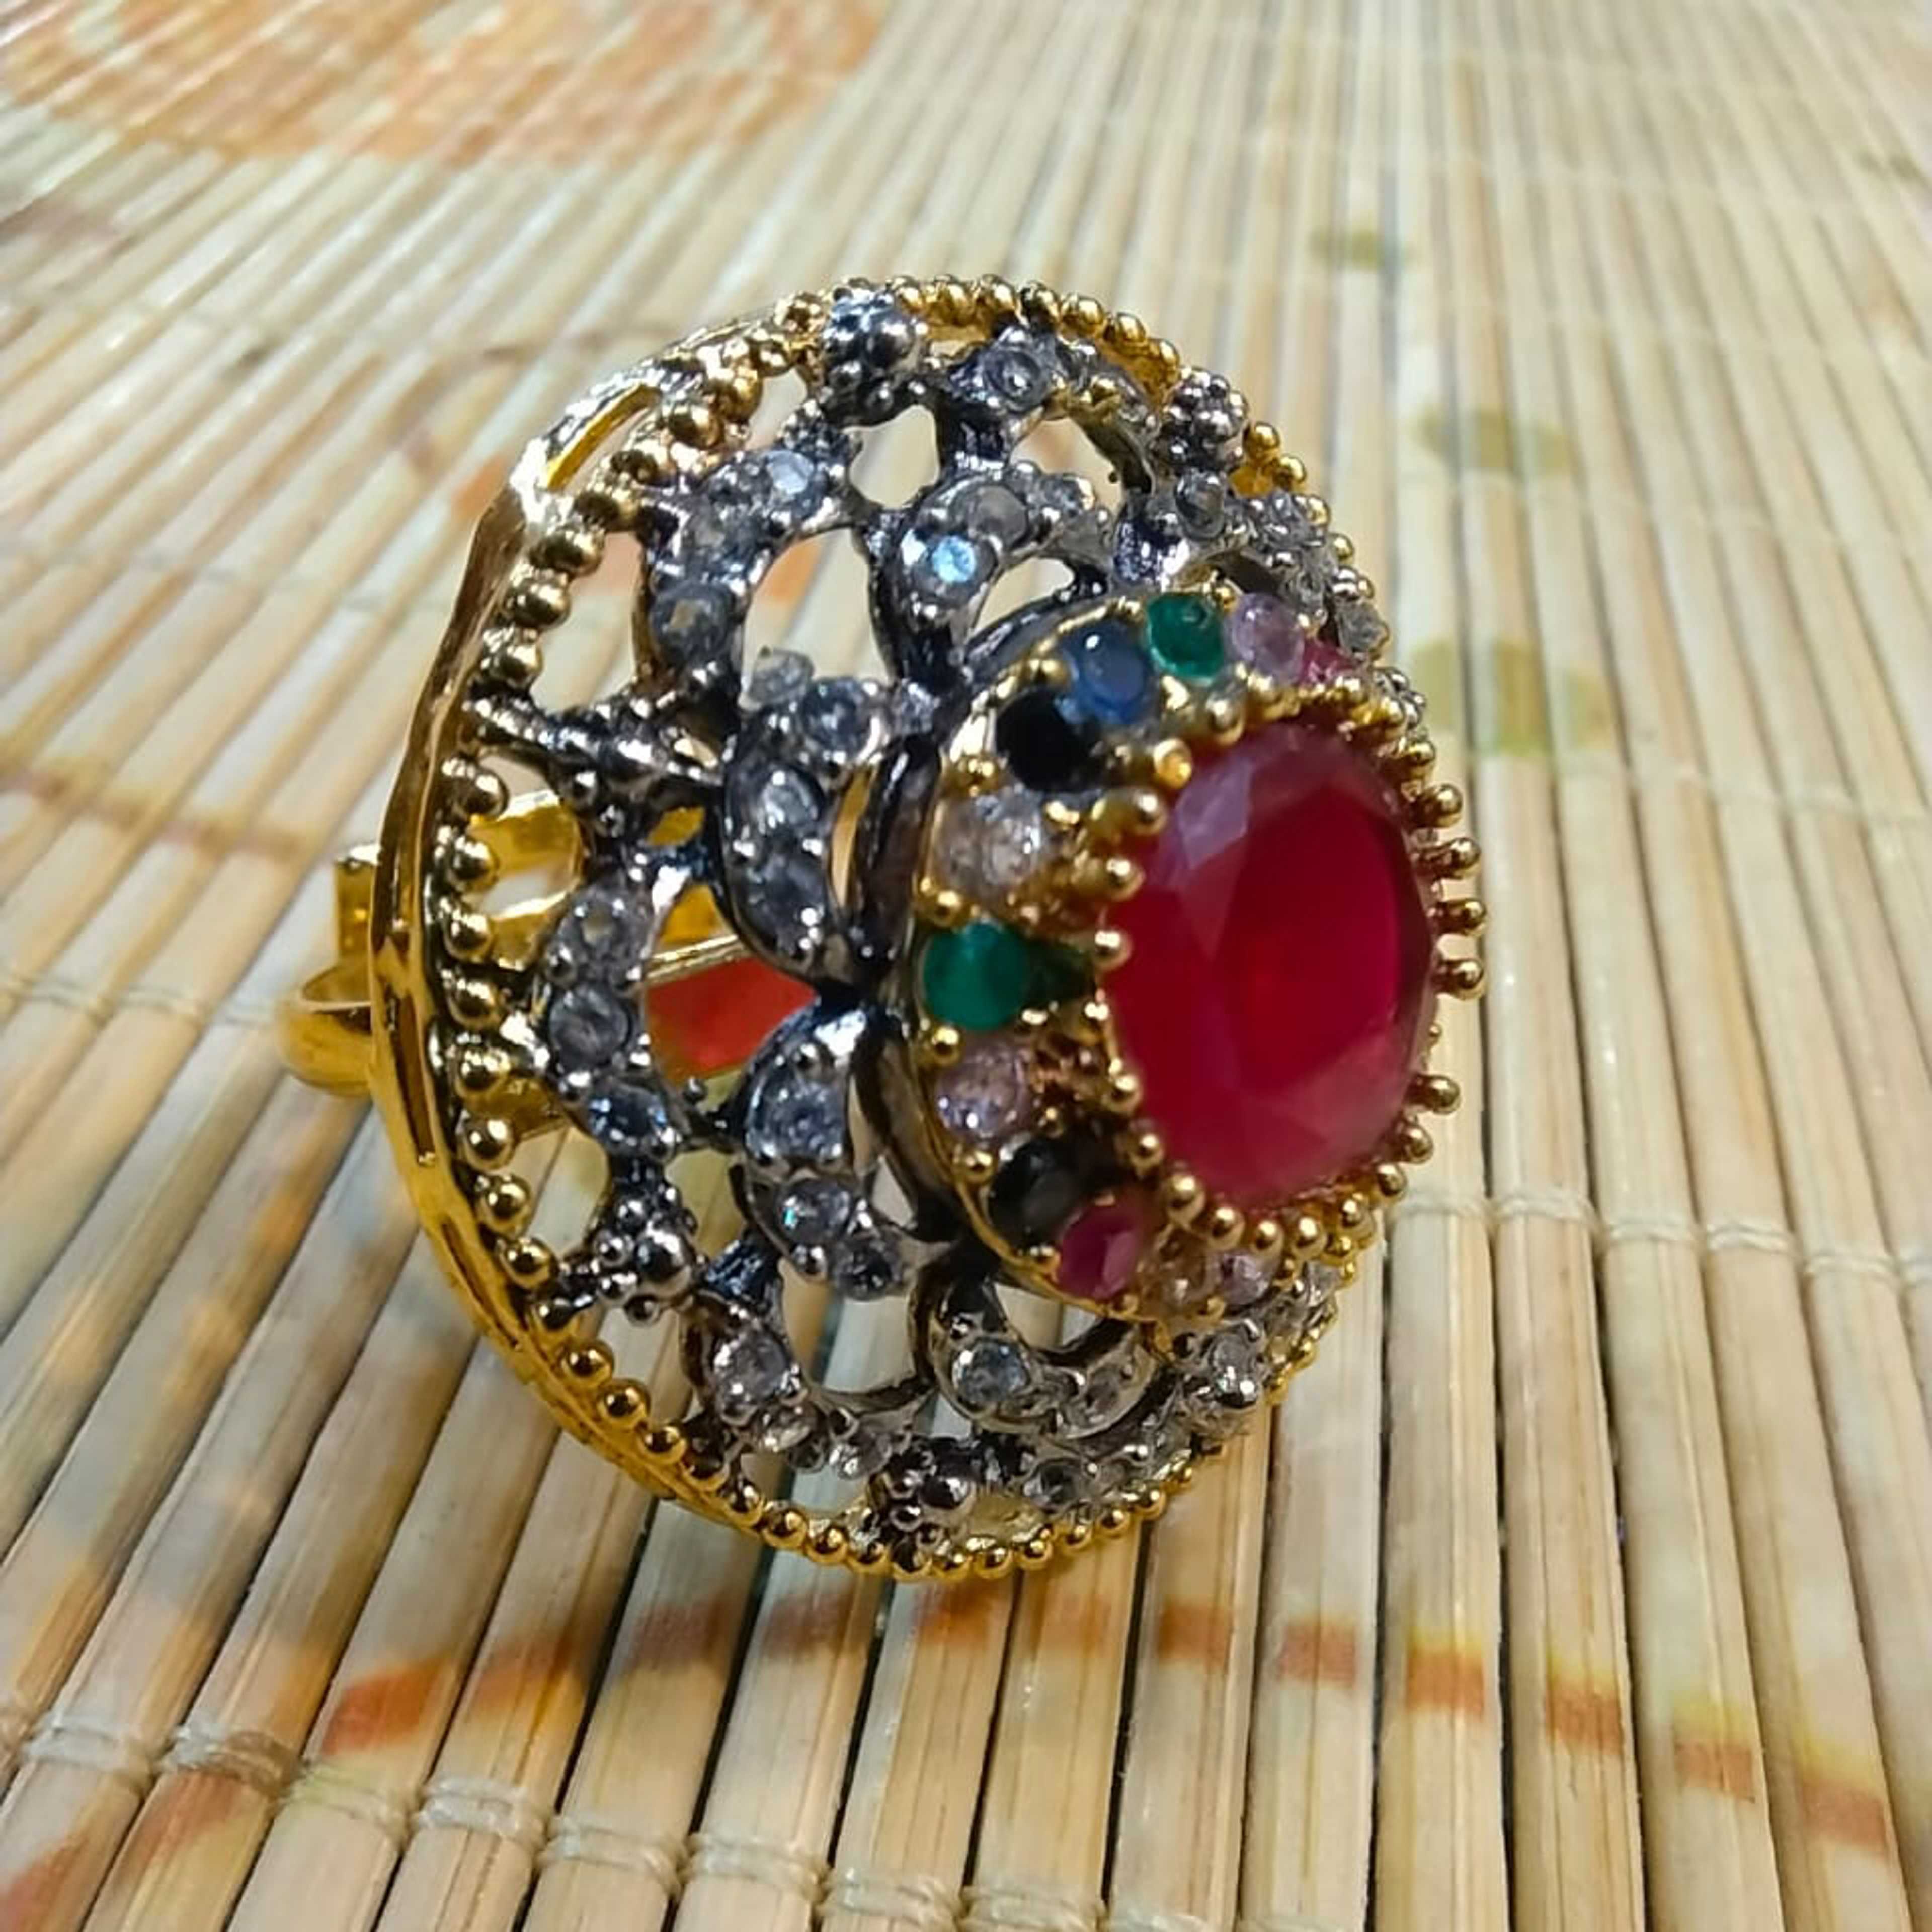 REd Ruby Stone with Multi Color Stones Ring with Oxidized Touch 